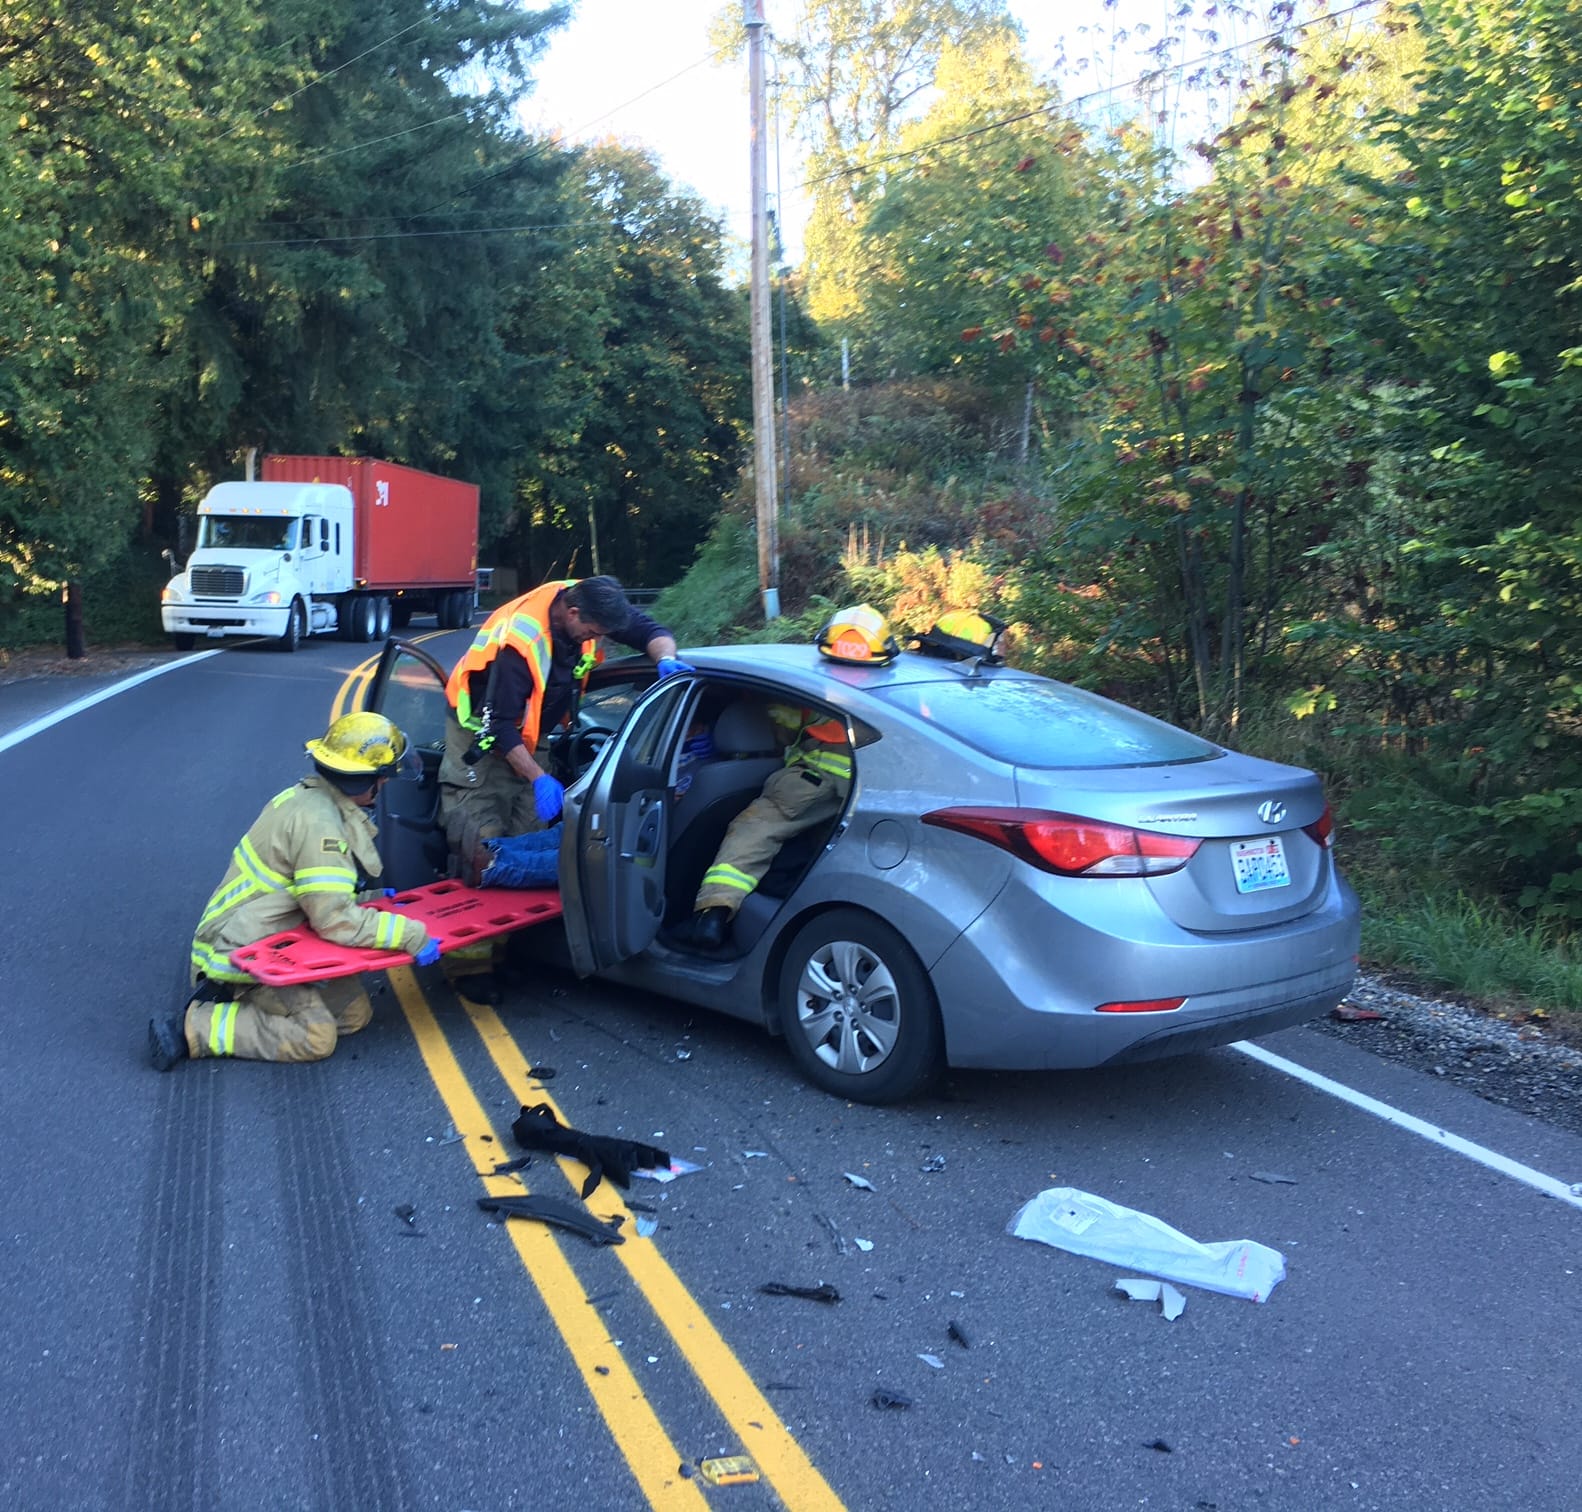 Firefighters extricated a 26-year-old woman after a head-on crash between a dump truck and a vehicle Wednesday morning. Timmen Road south of La Center is blocked in the area.